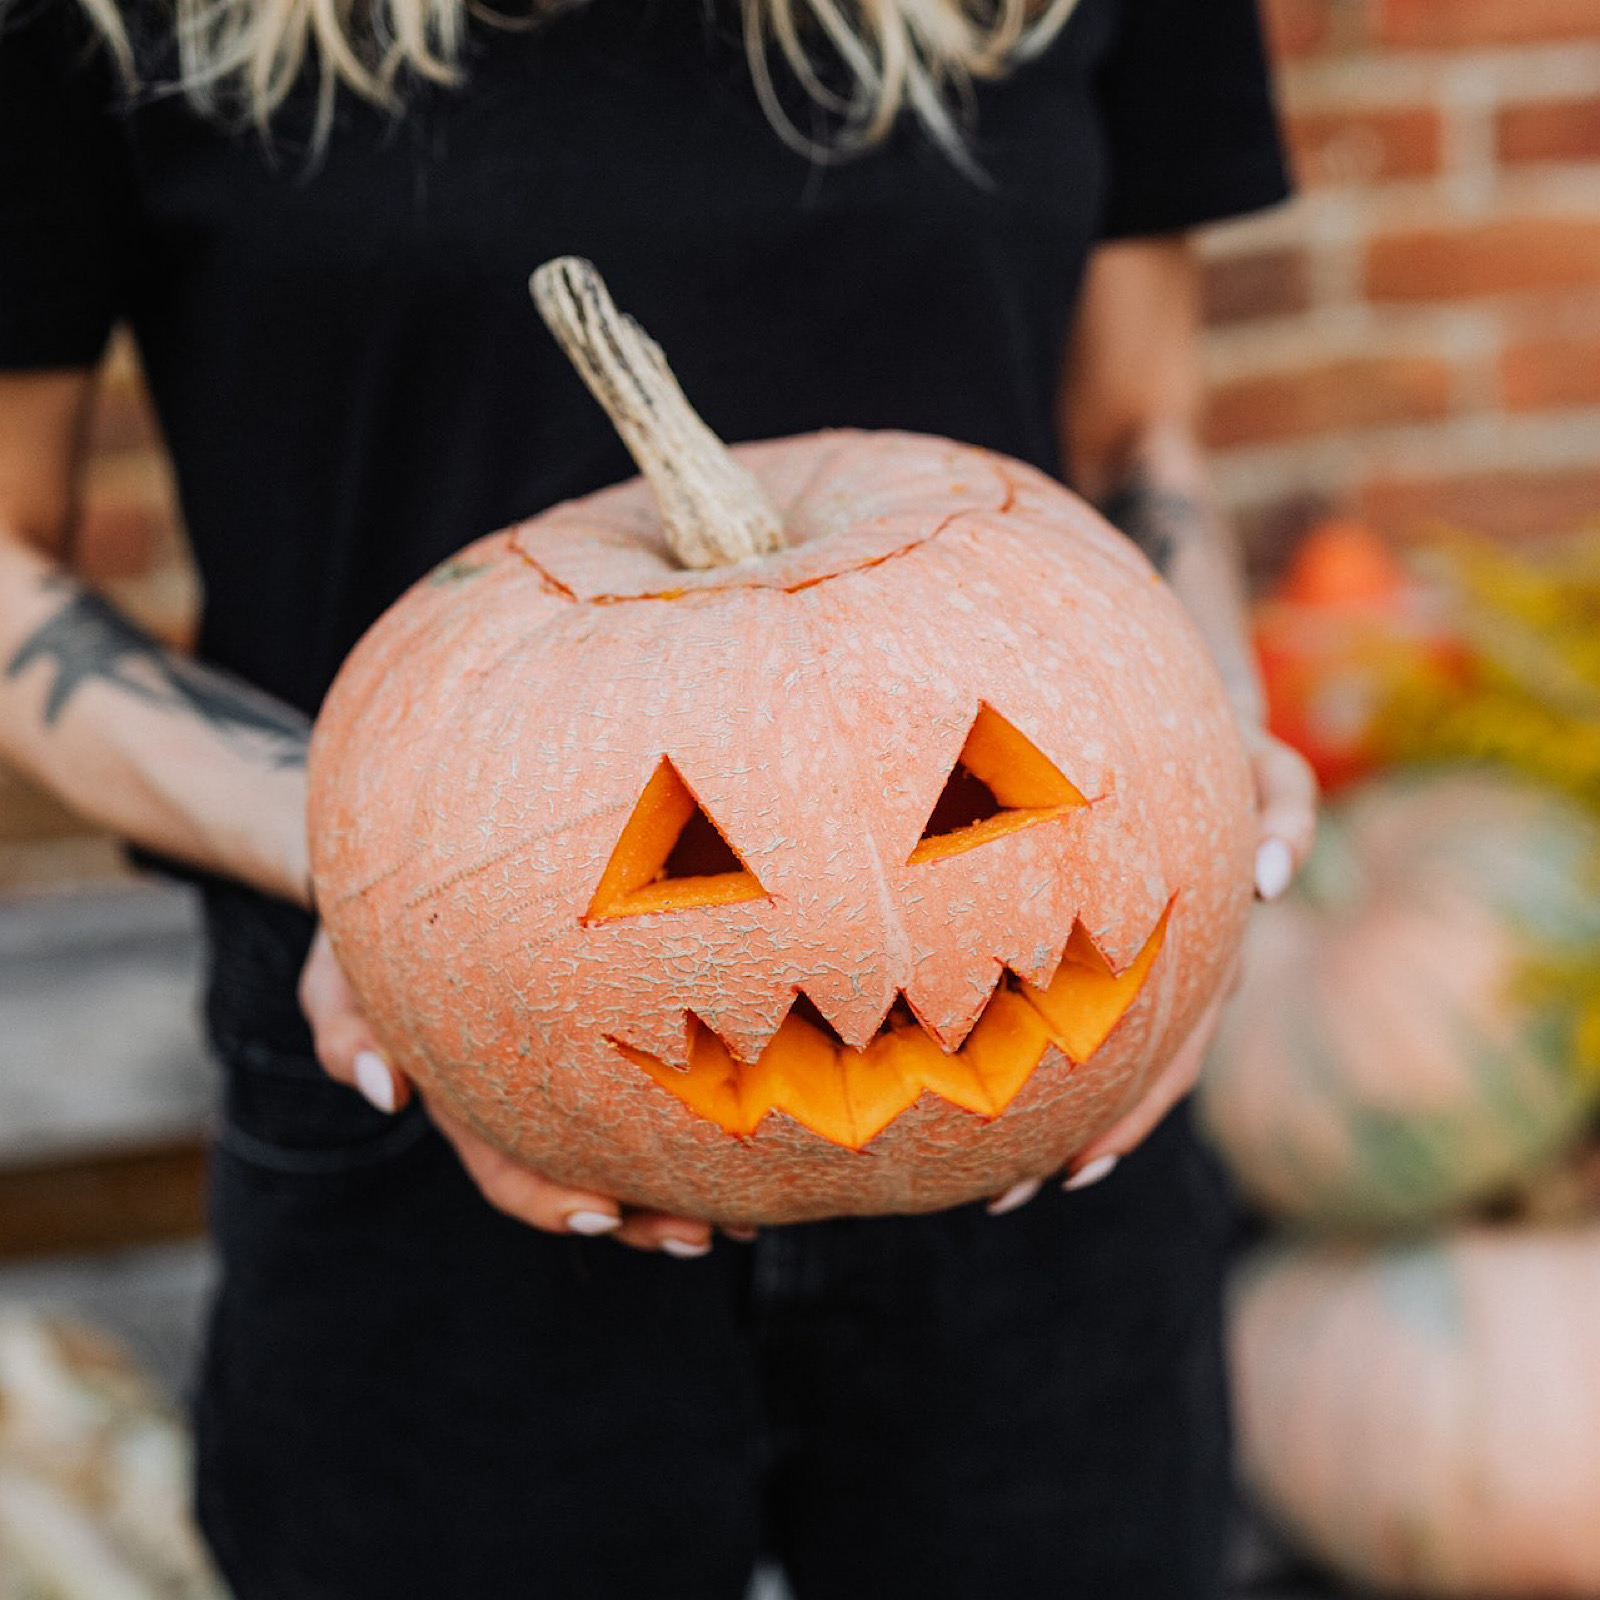 How To Maintain Your Oral Health This Halloween